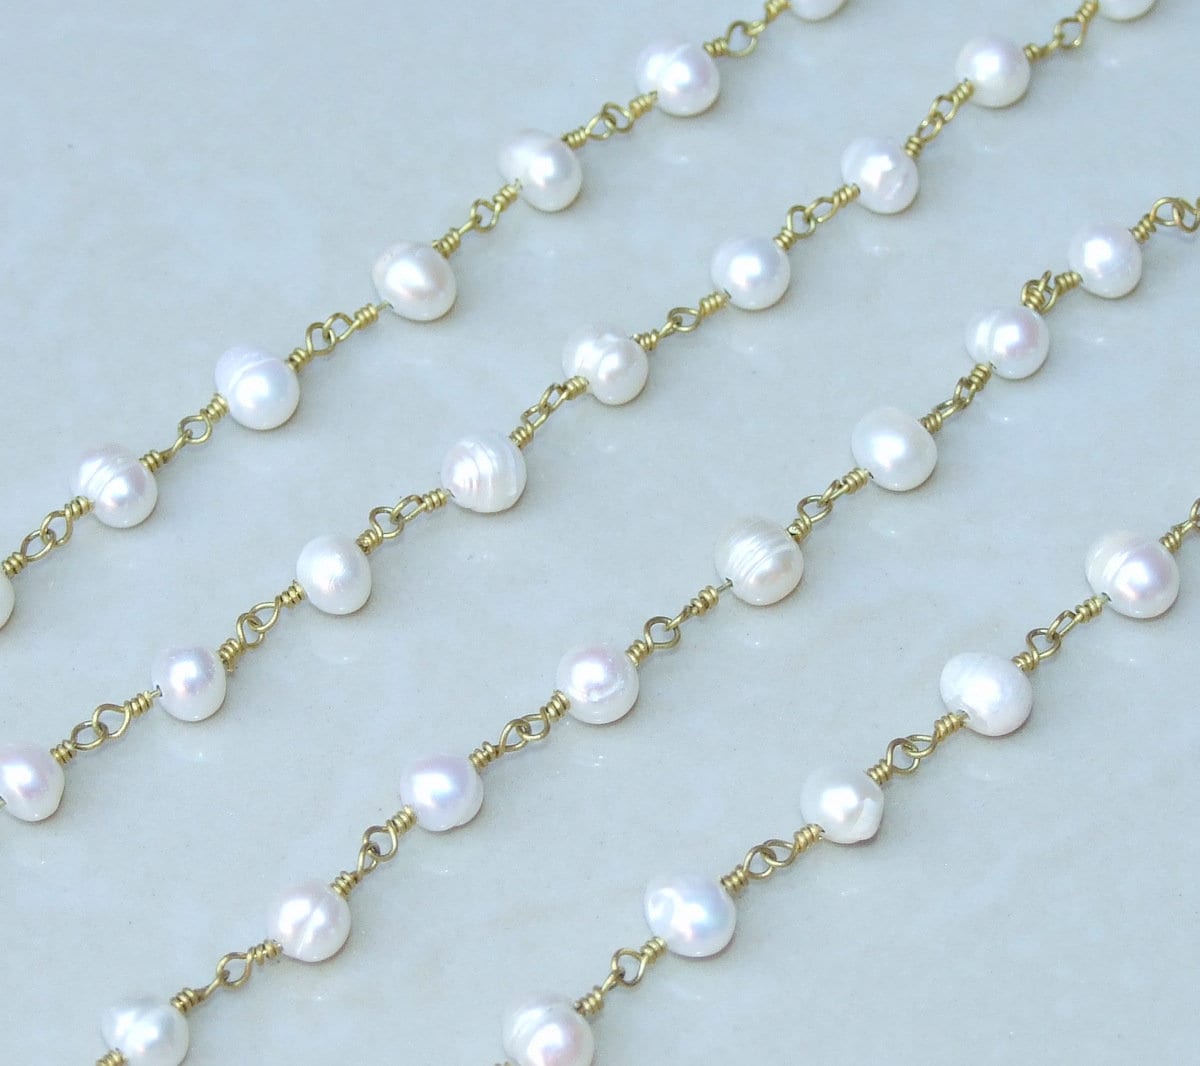 White Freshwater Pearl Rosary Chain - Wire Wrapped Chain,  Natural Freshwater Pearls - Potato Shaped Pearls - 6-7mm - Sold by the Foot